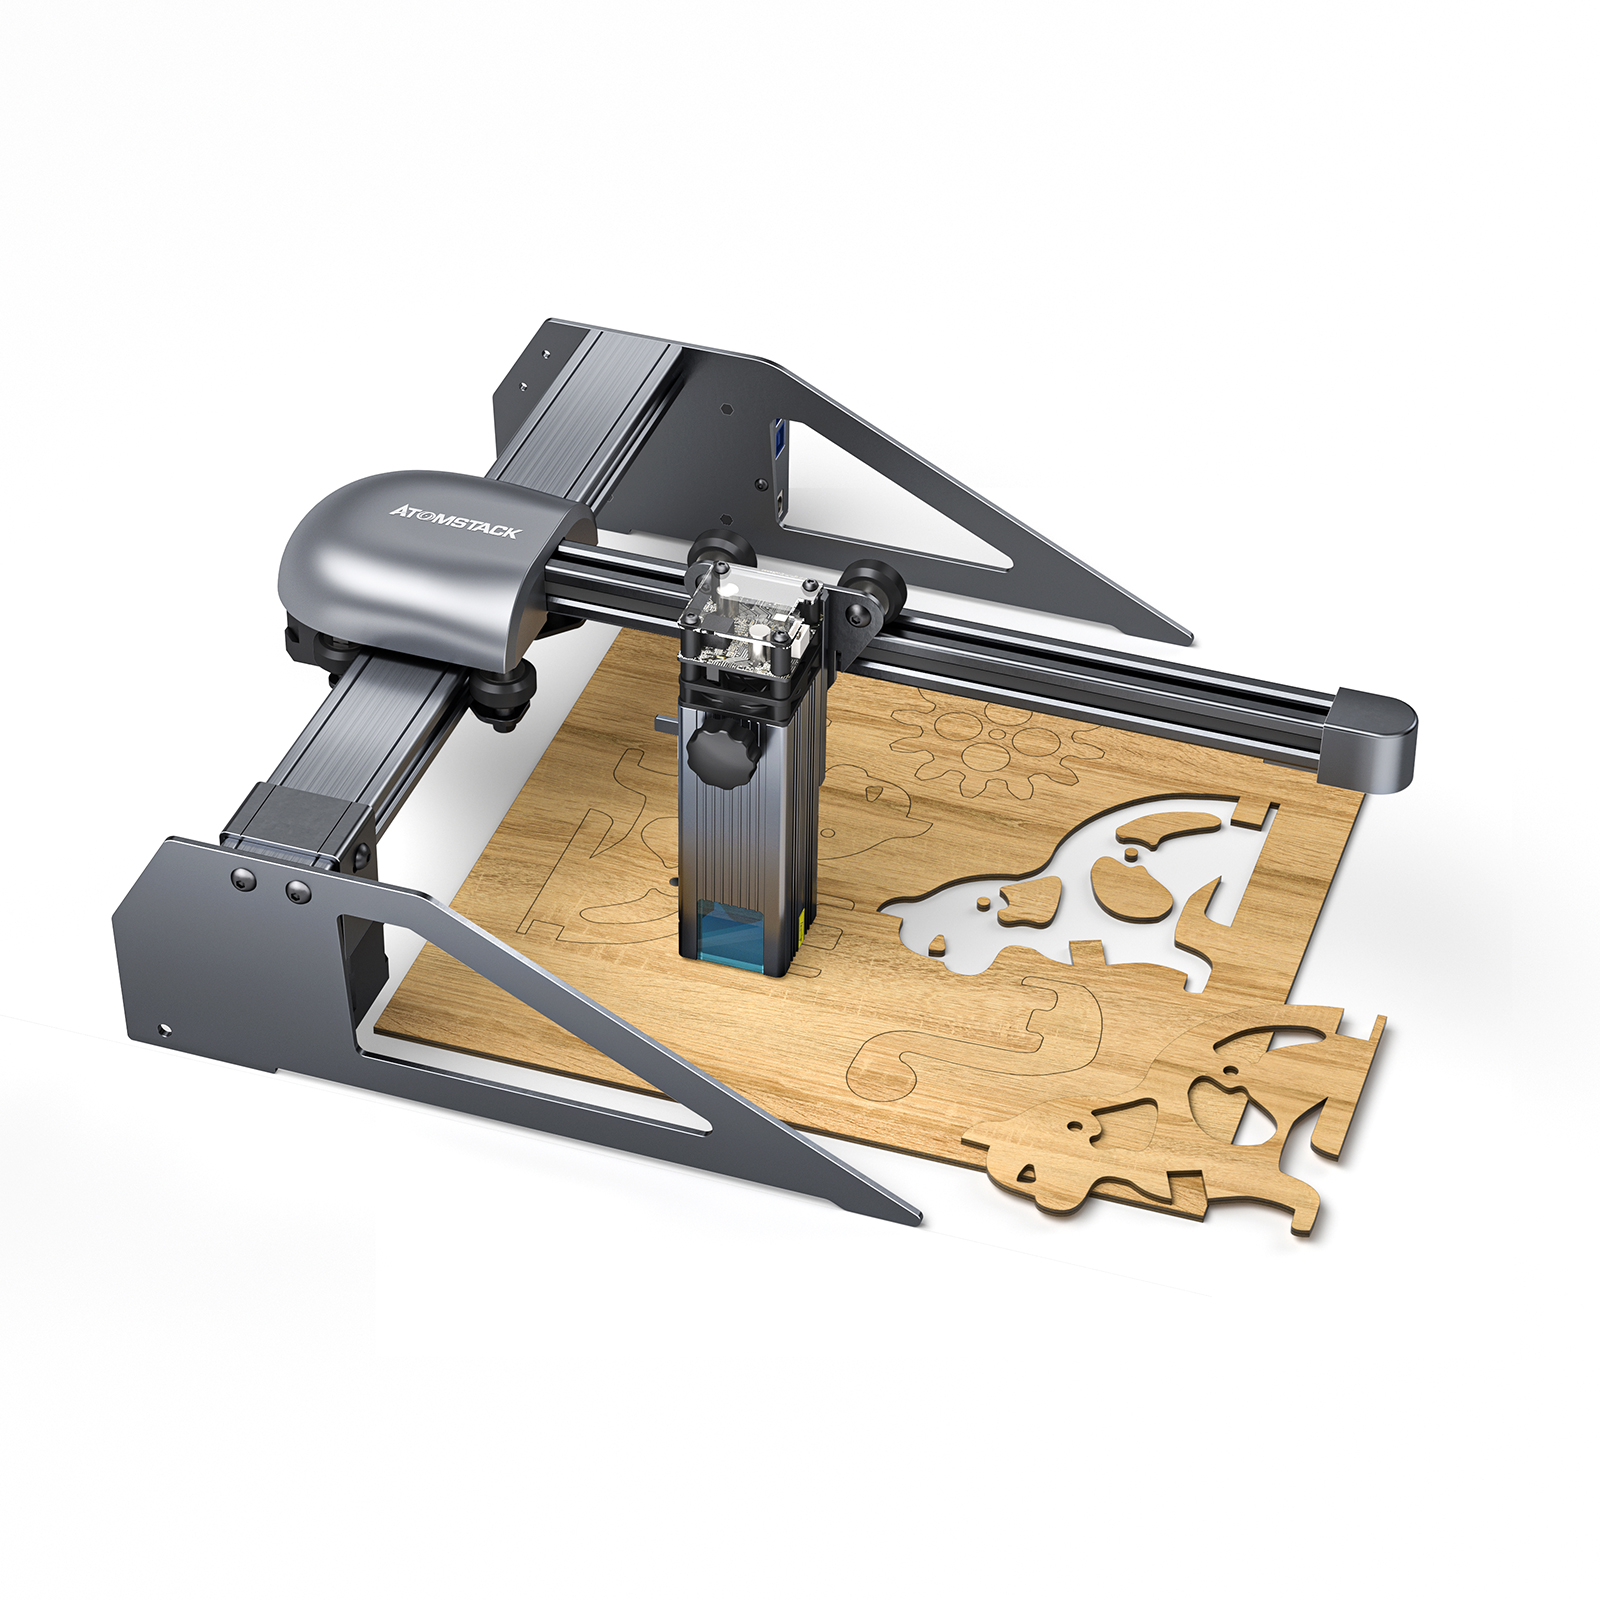 Find New ATOMSTACK P7 M40 Portable Laser Engraving Machine Cutter Wood Cutting Design Desktop DIY Laser Engraver New Eye Protection Design Upgrated Ultra-Fine Laser Focal Area for Sale on Gipsybee.com with cryptocurrencies